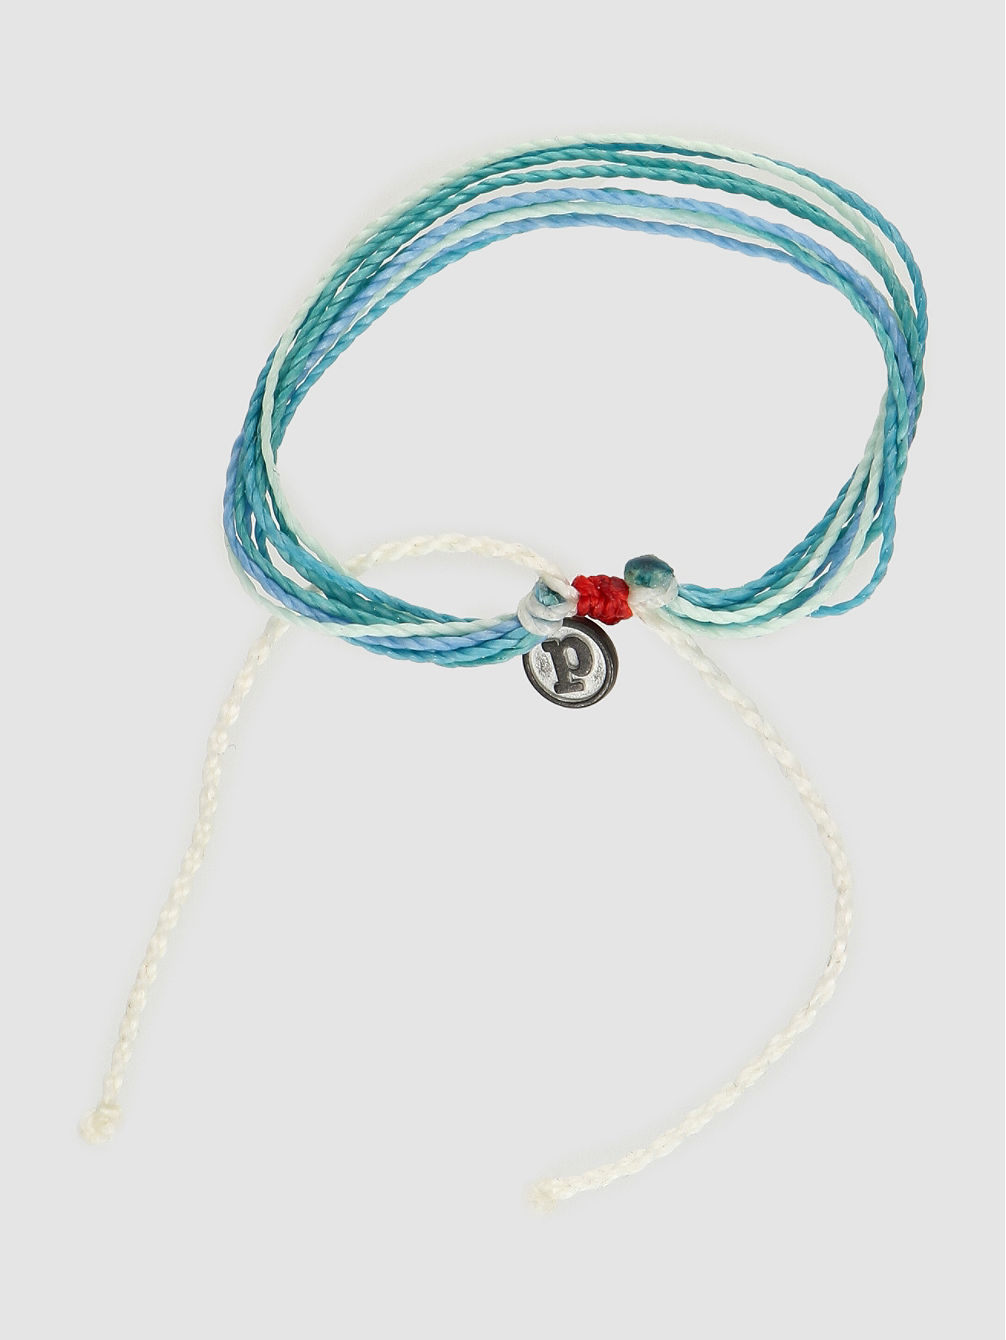 Charity: For The Oceans Jewellery